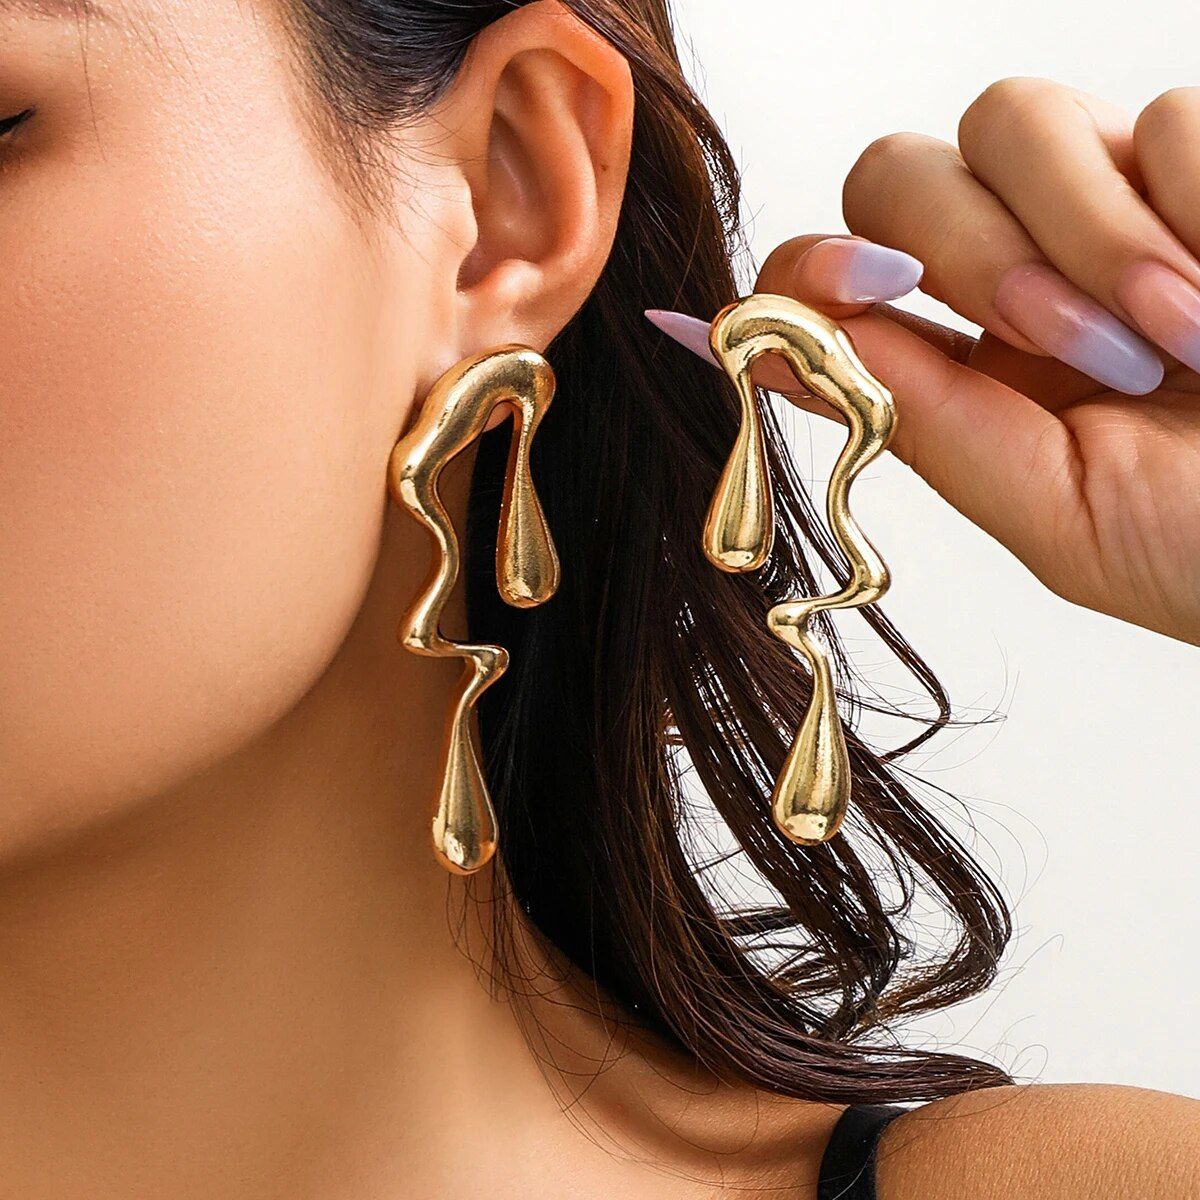 Close-up of a woman showcasing new fashion with Vintage Gold Geometric Water Drop Earrings, highlighting her hand adjusting one earring with a focus on the jewelry and partial view of her face.